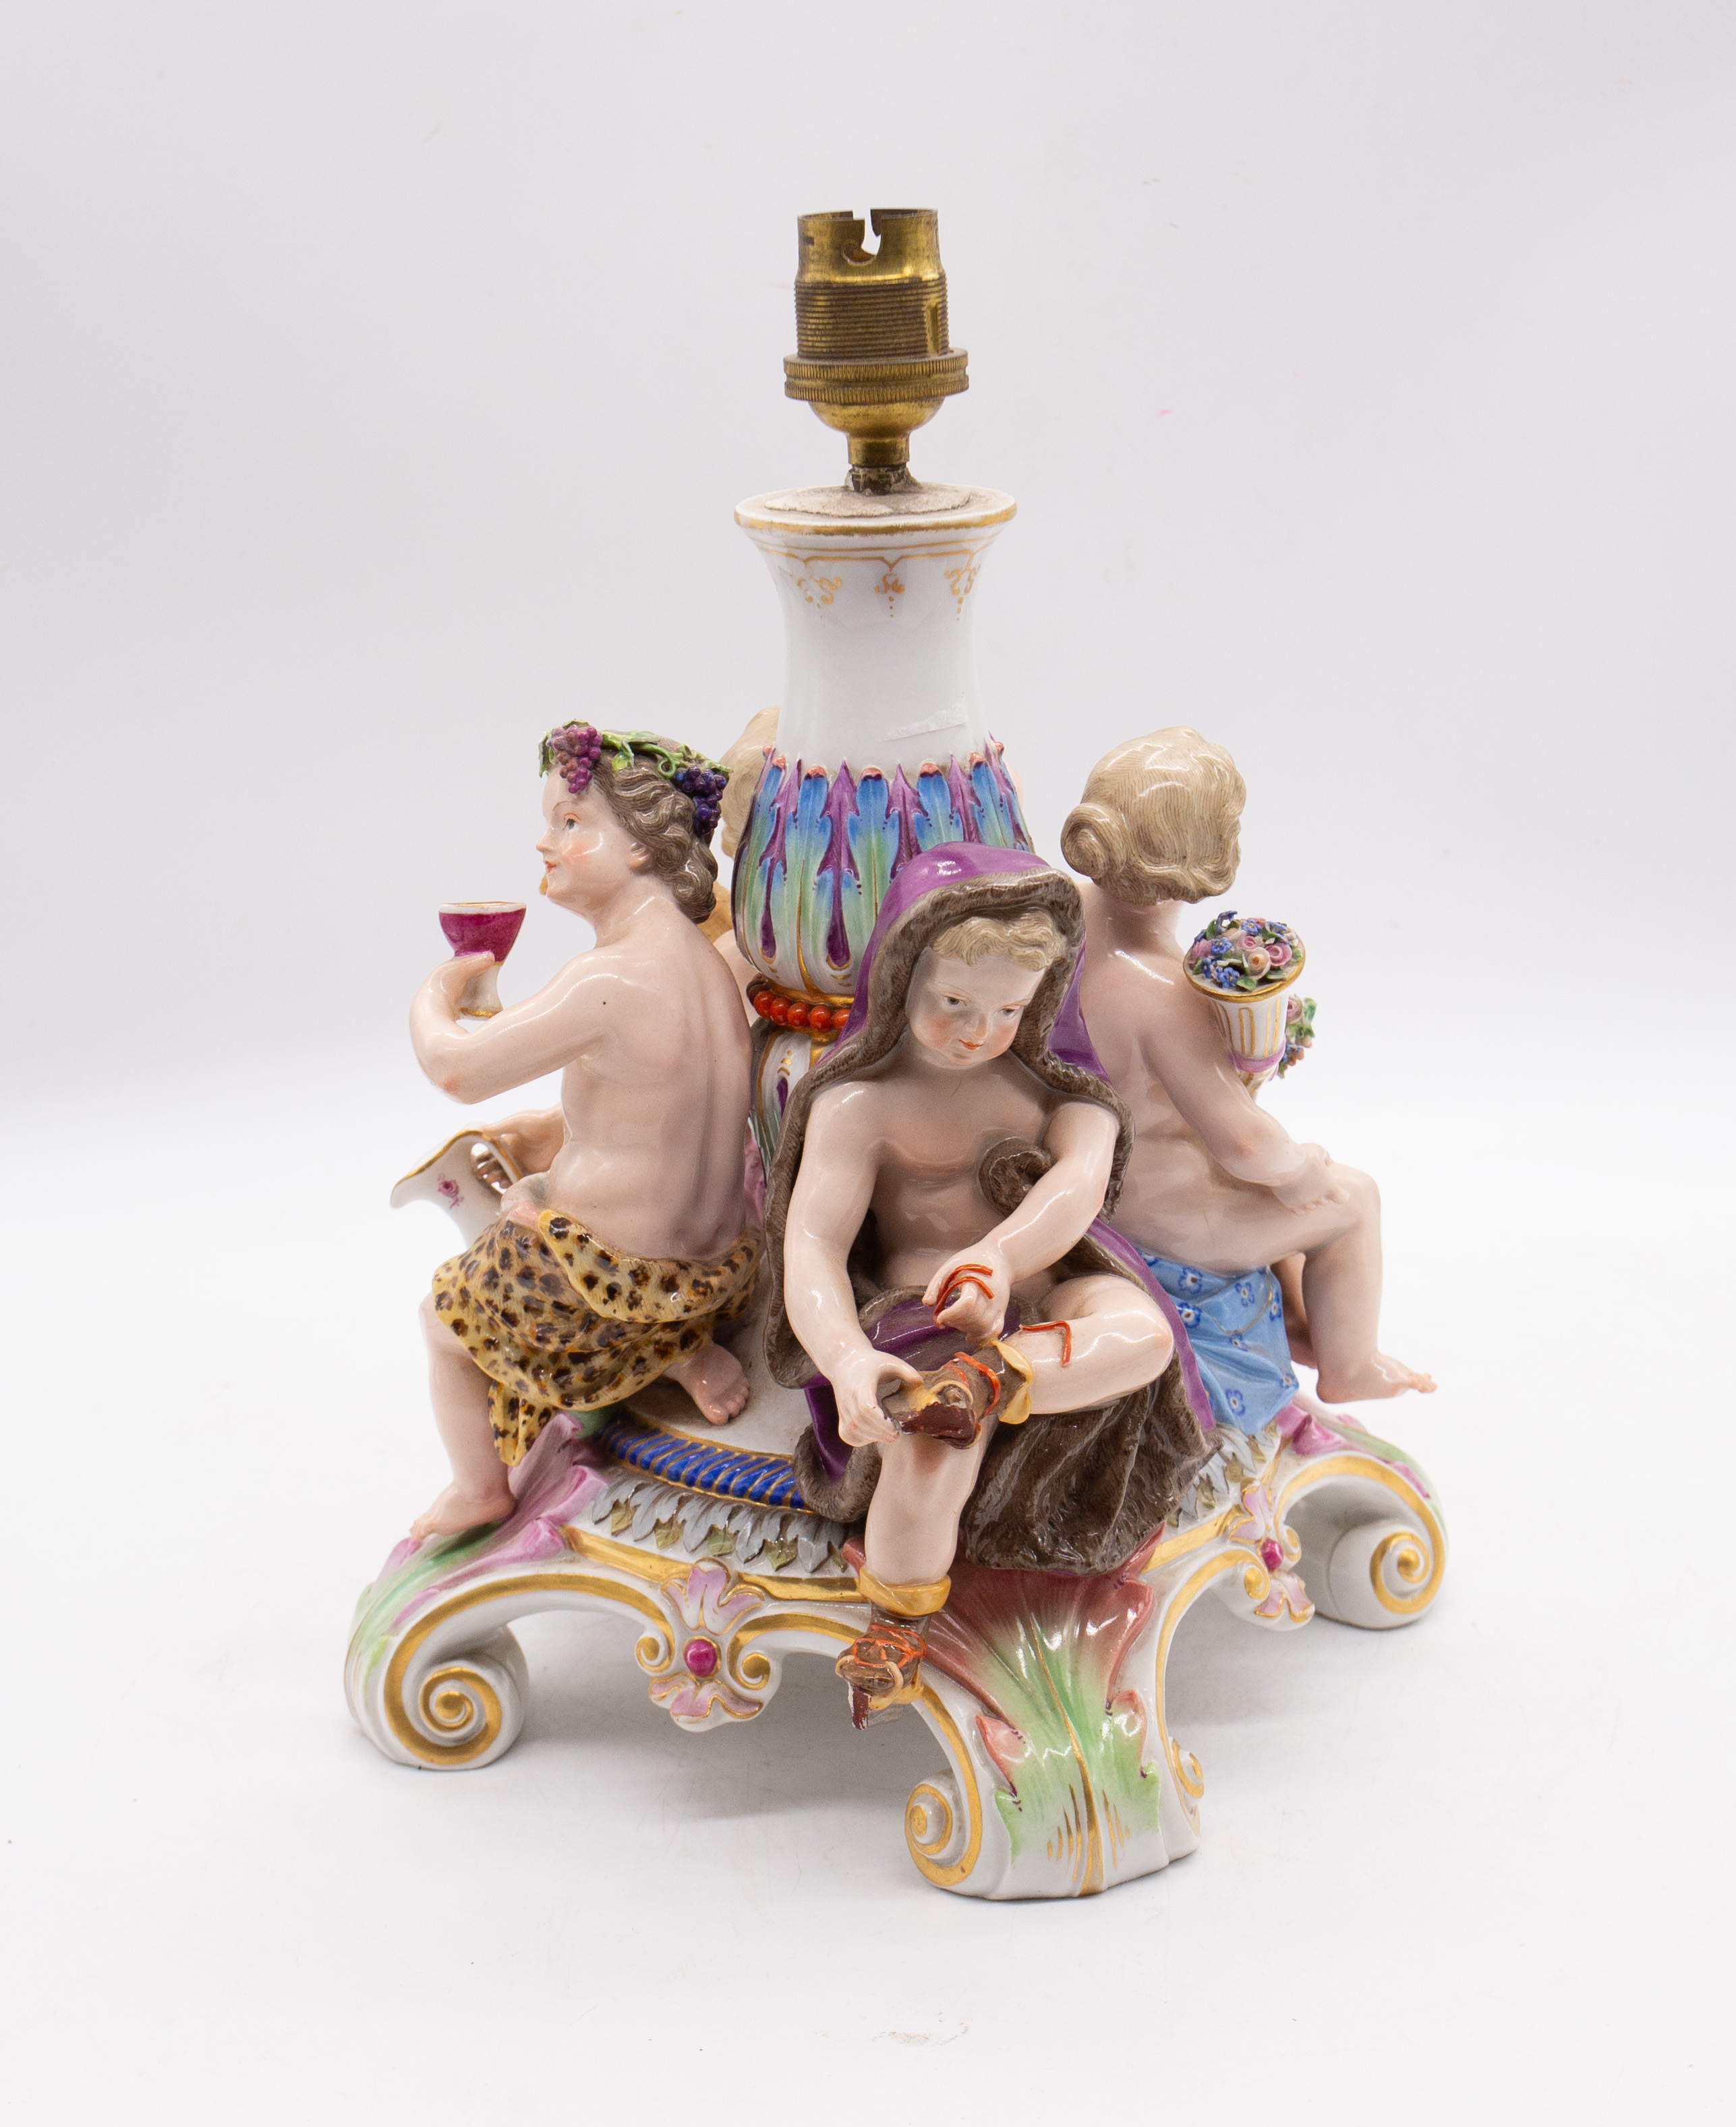 Meissen - A 19th century painted ceramic comport base, broken in the past and turned into lamp base.